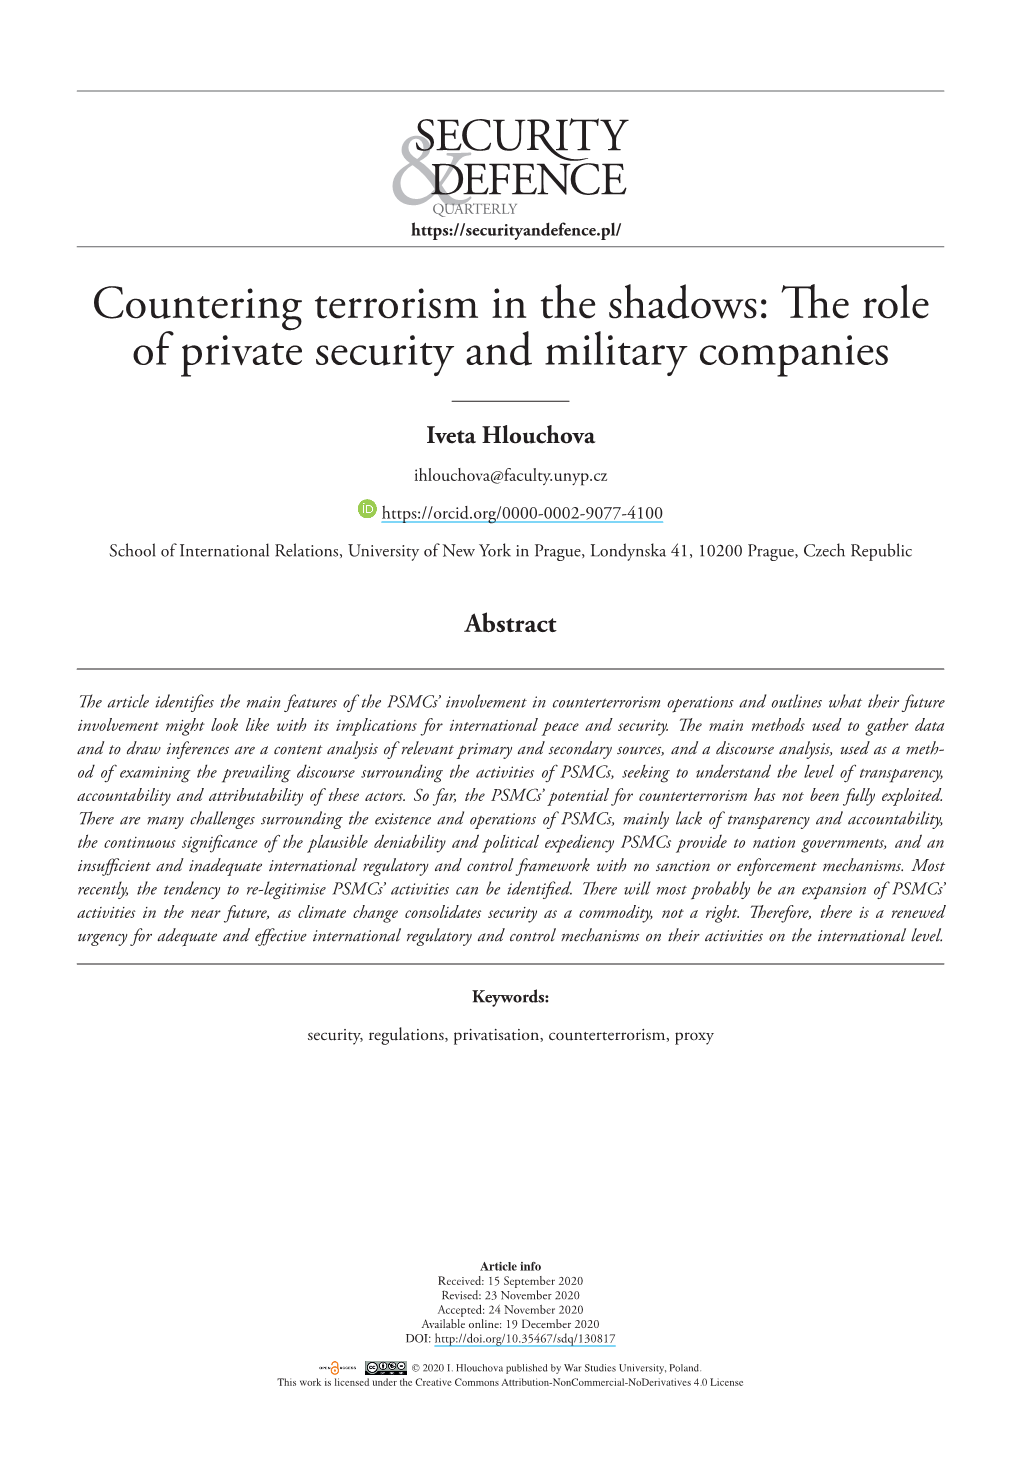 Countering Terrorism in the Shadows: the Role of Private Security and Military Companies